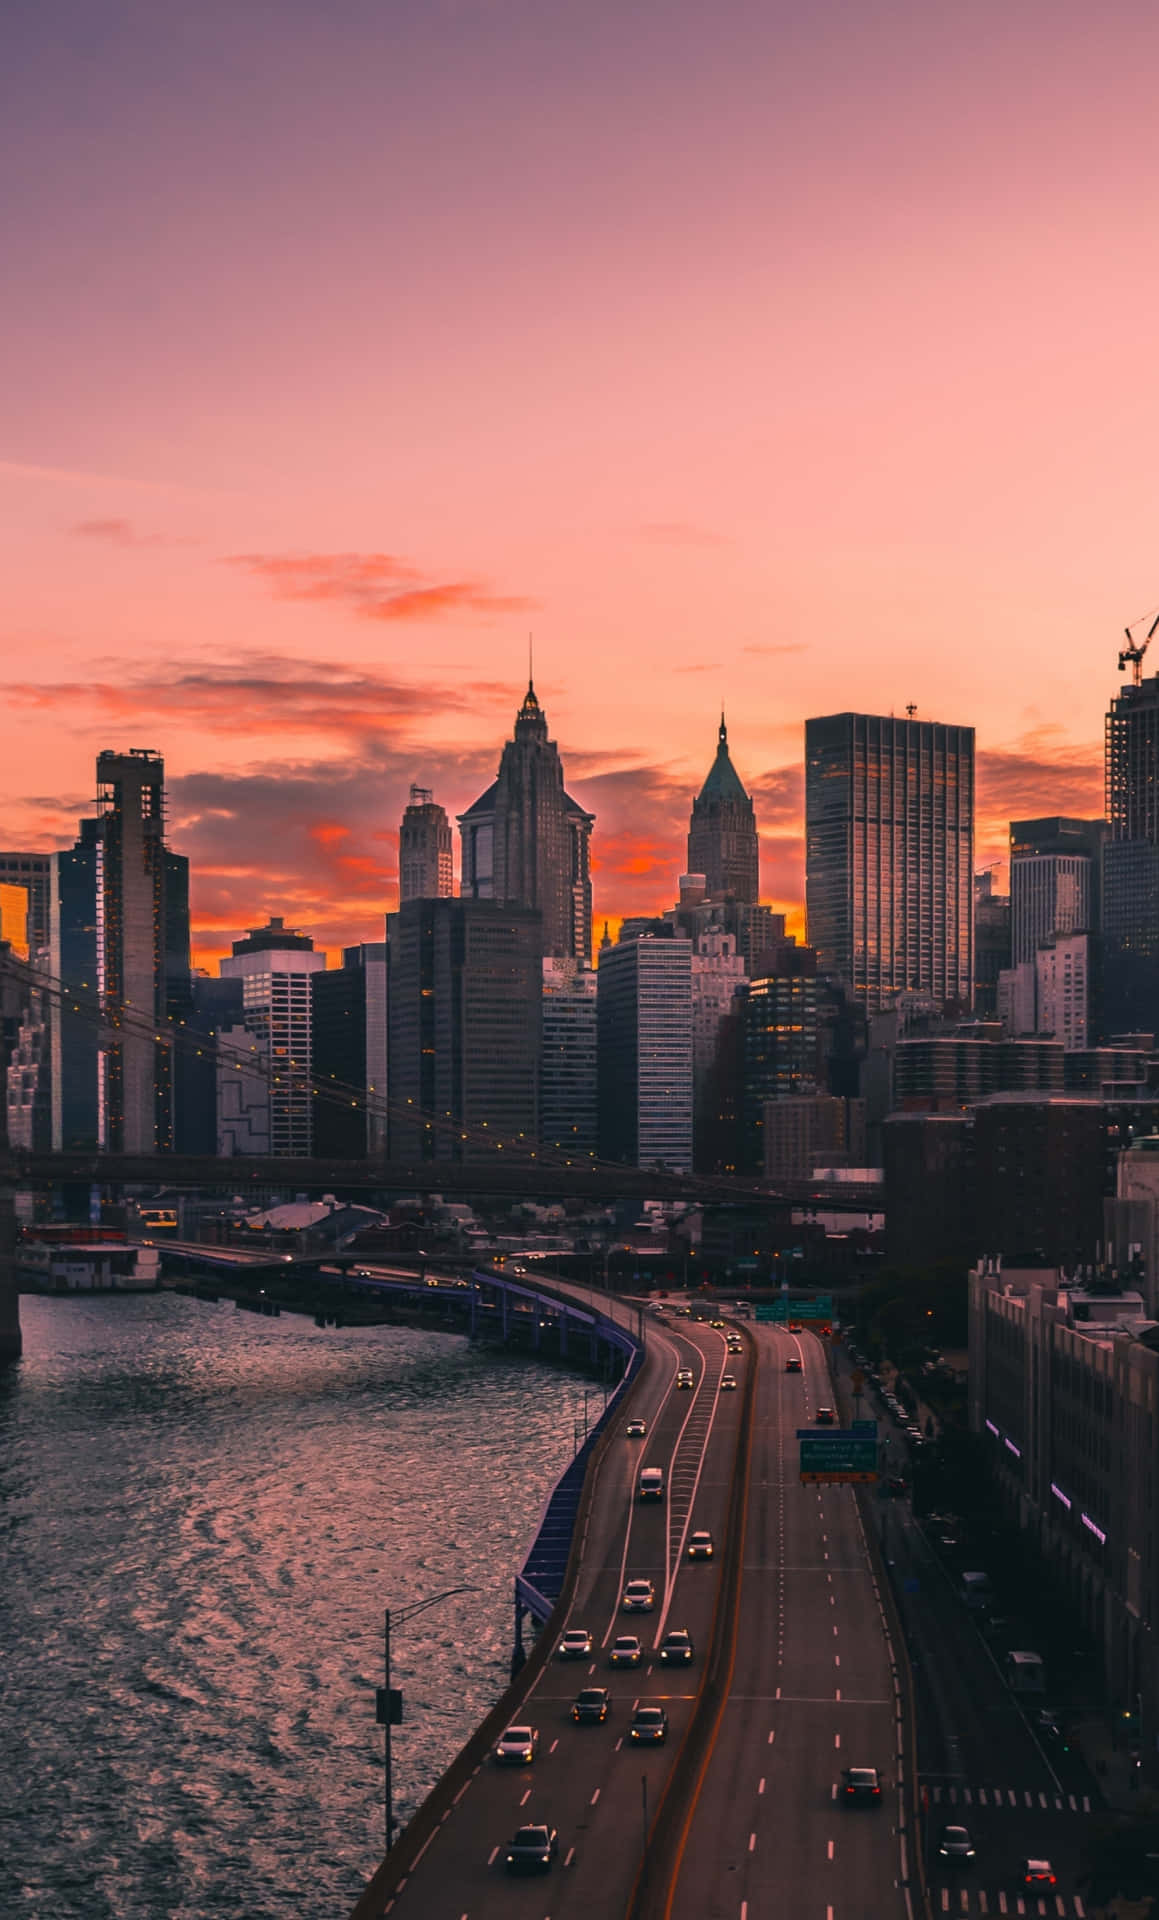 Get lost in the skyline of a beautiful city at sunset Wallpaper